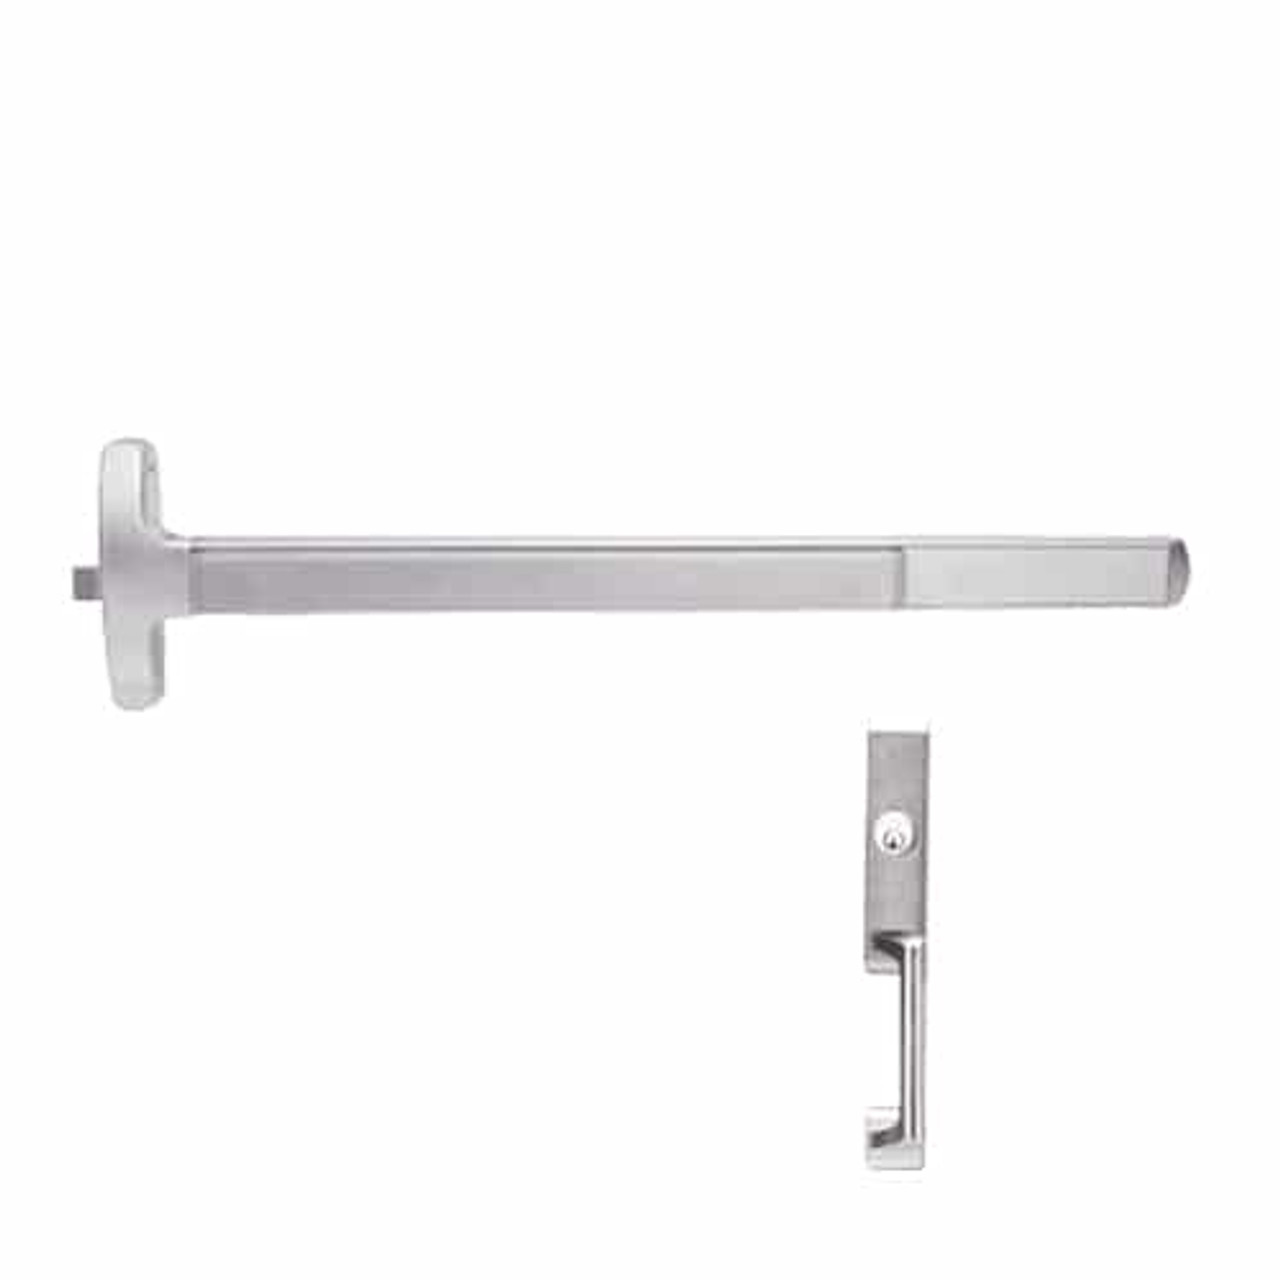 F-24-R-NL-US32-4-LHR Falcon Exit Device in Polished Stainless Steel